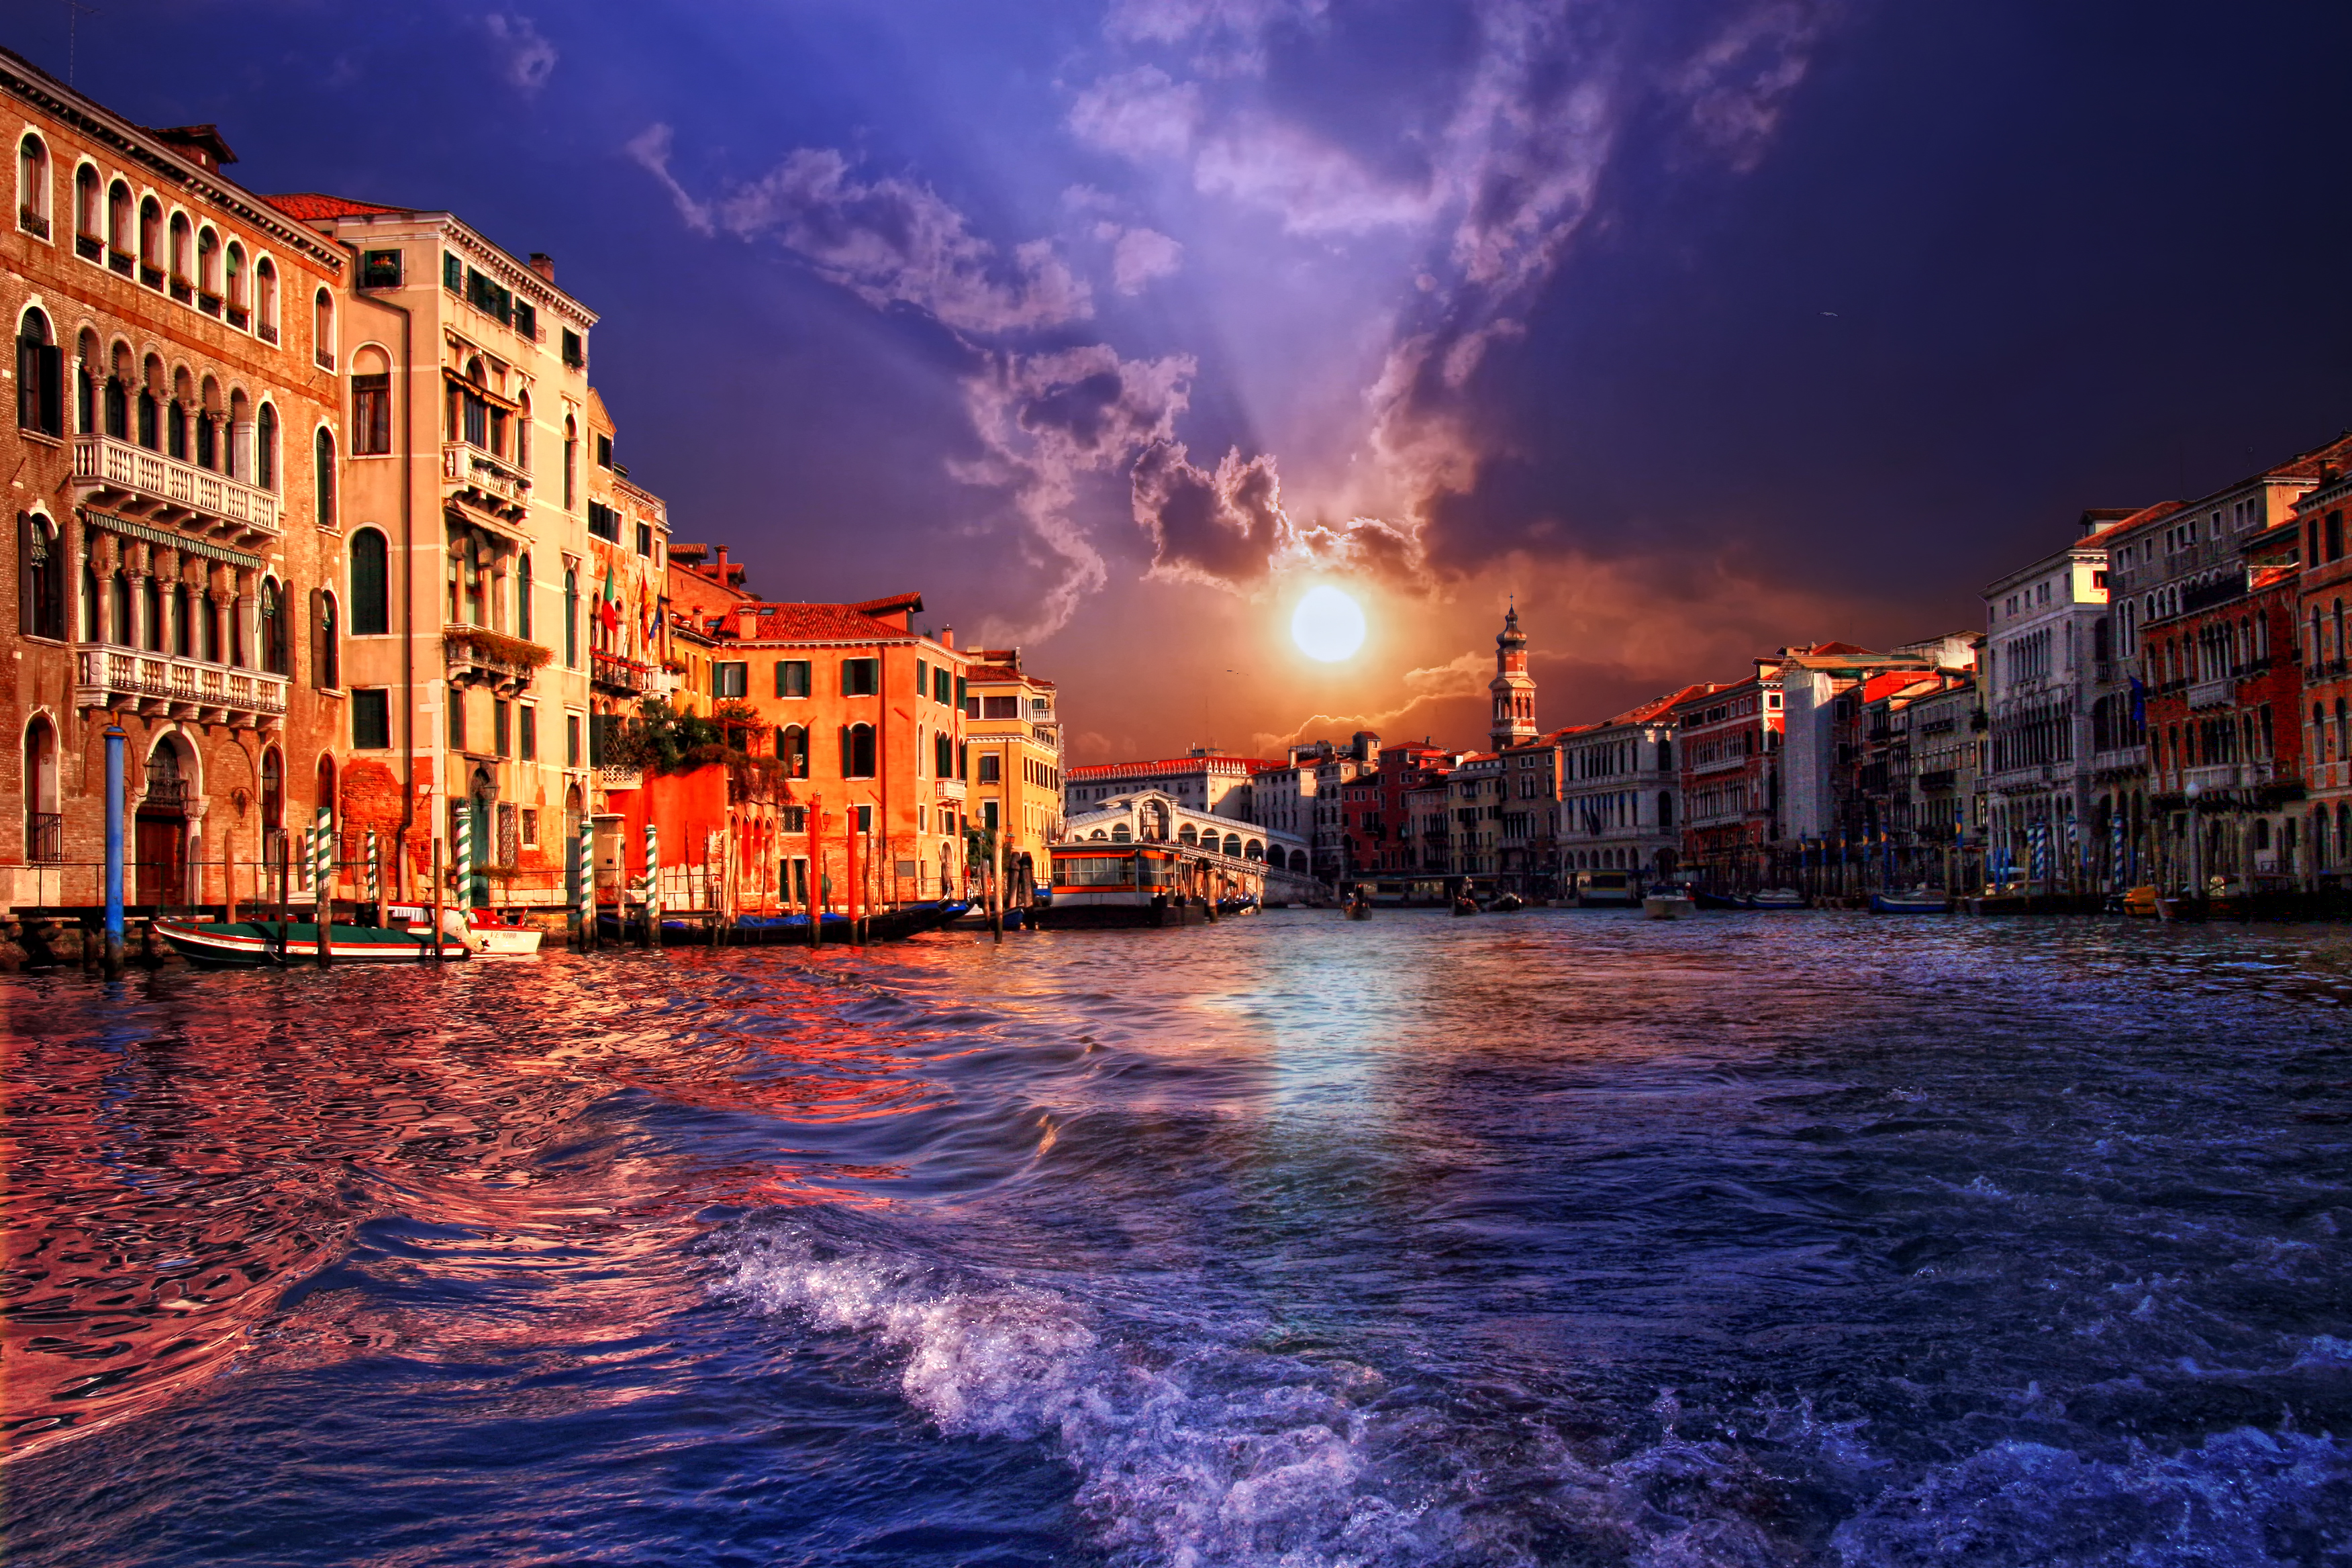 7 Day Amazing Vacation in Rome, Pompeii, and Venice with Family - Grand Canal in Venice